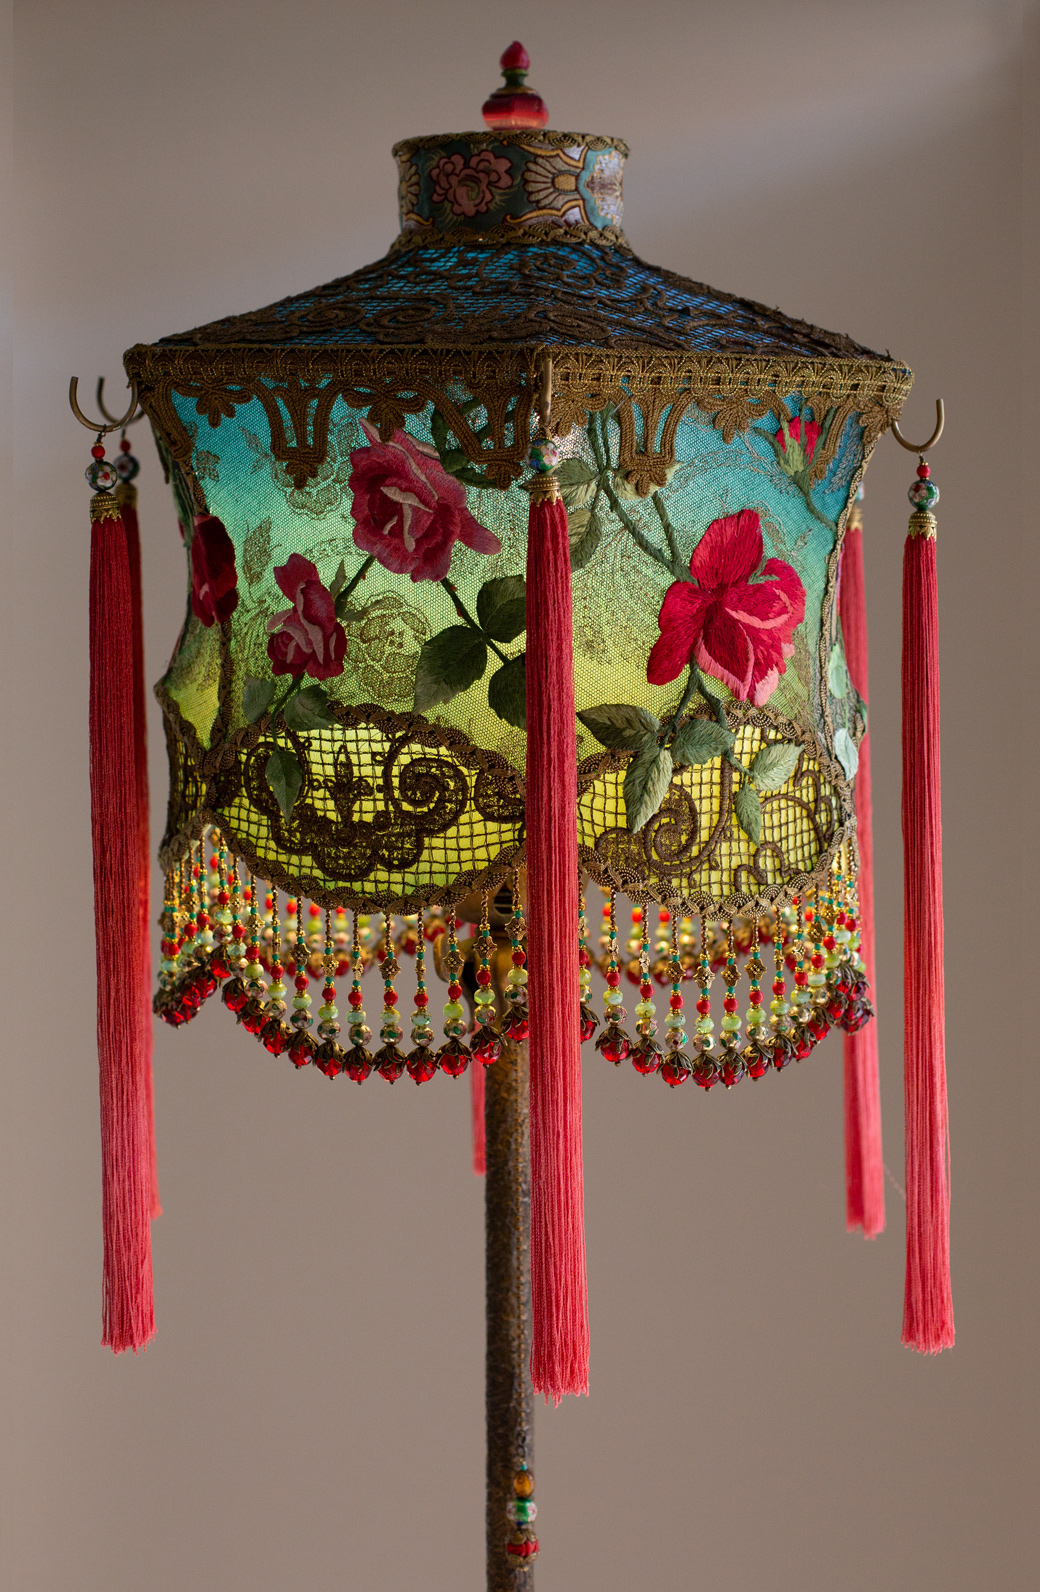 Hong Kong Lantern with Red Roses  by Christine Kilger Nightshades